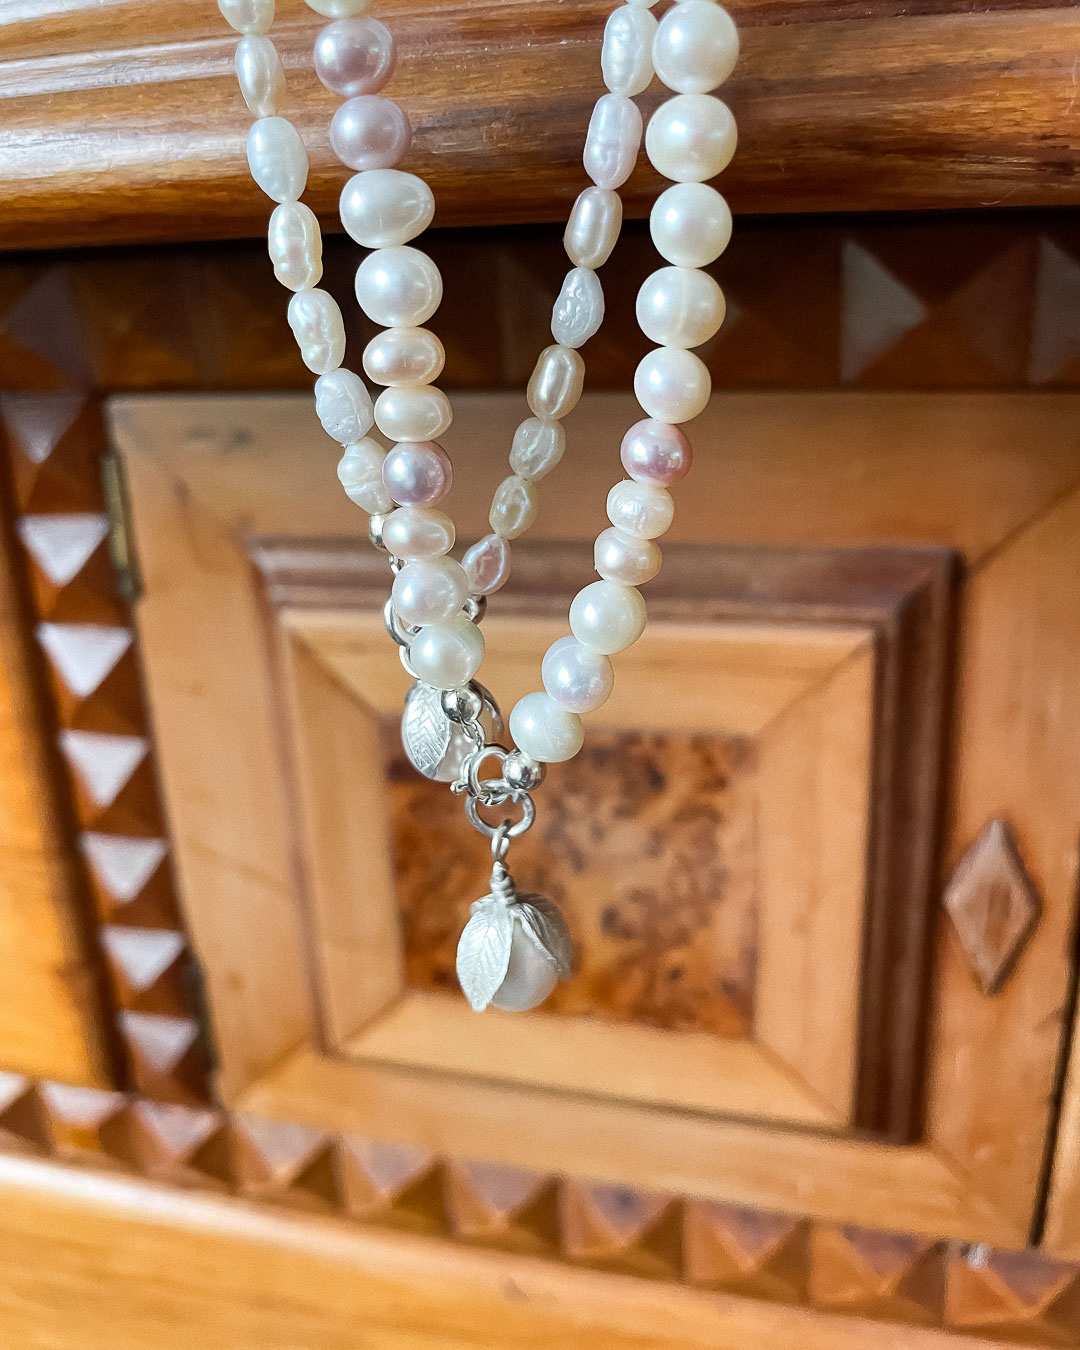 A close up of the Two one-of-a-kind Glow Pearl Necklaces made from freshwater pearls and the Sterling Silver and Pearl pendant